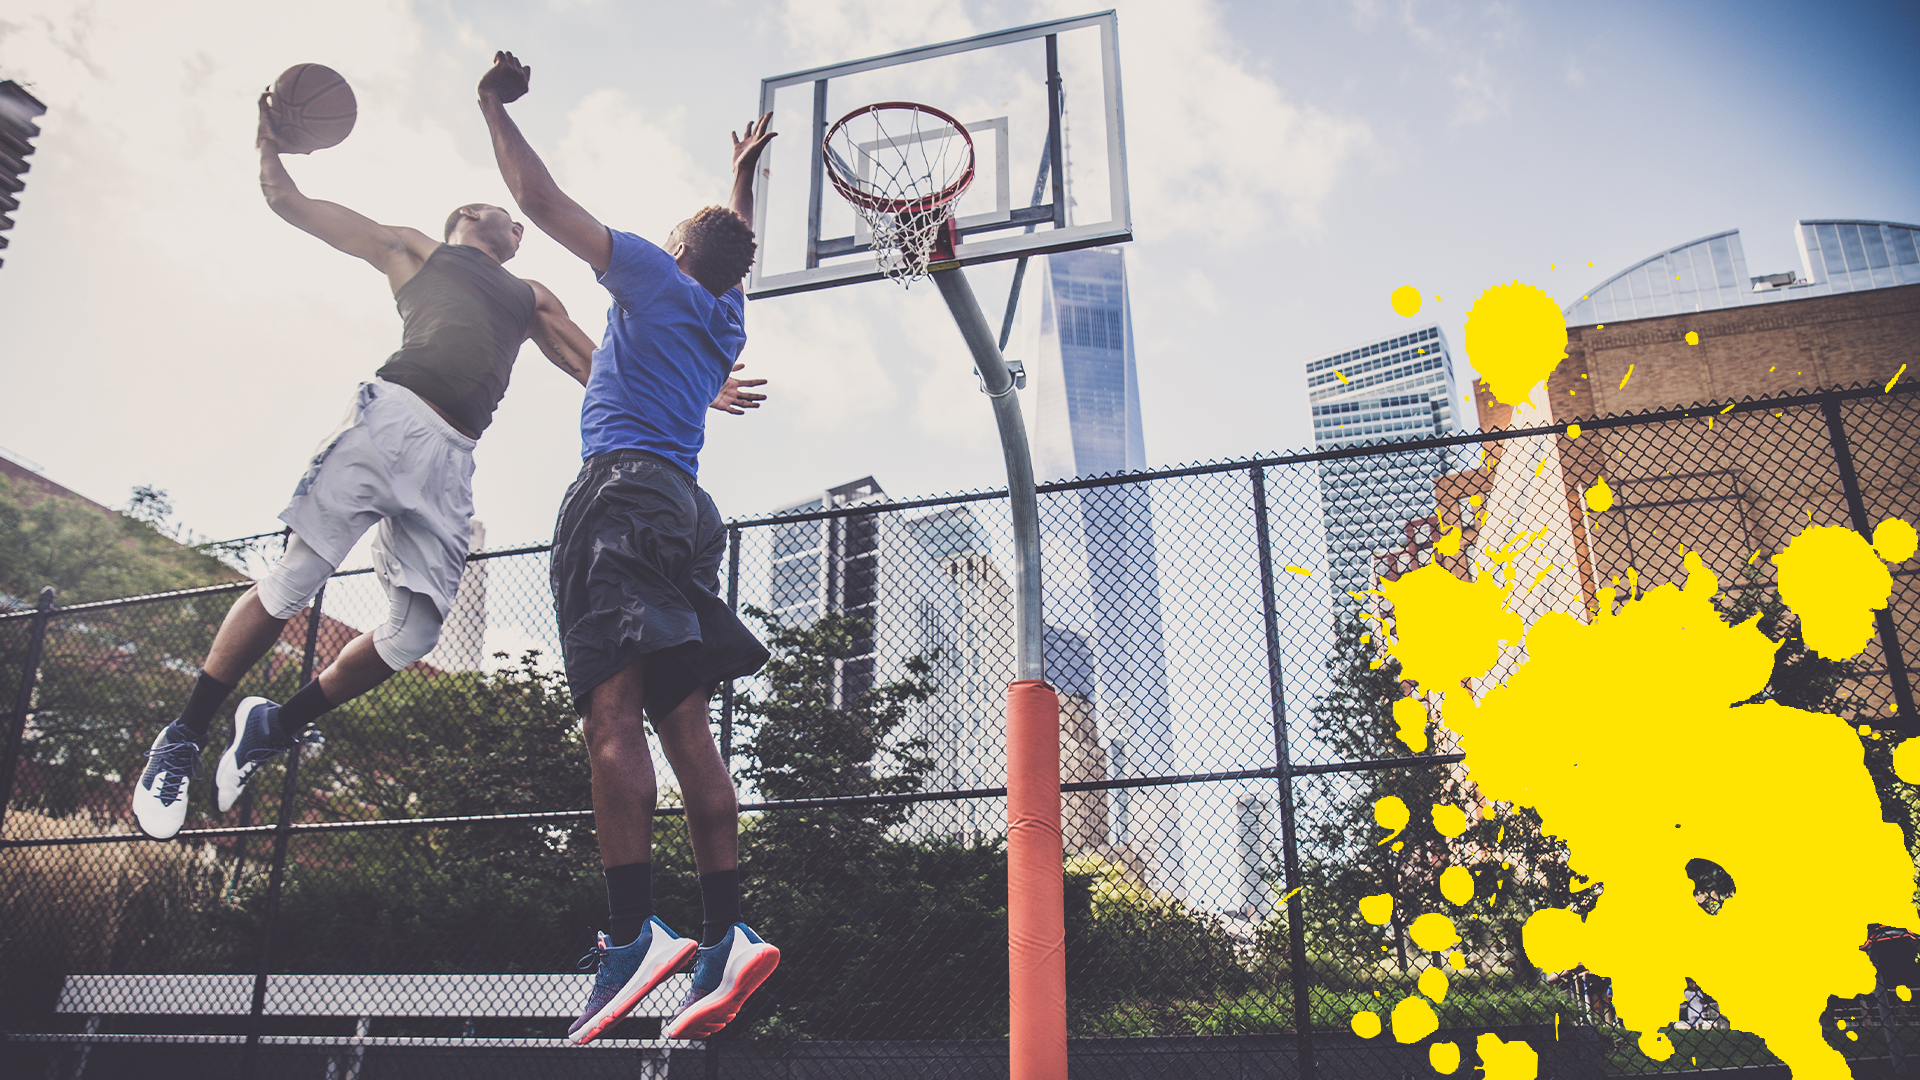 Two basketball players in outdoor court with yellow splat 